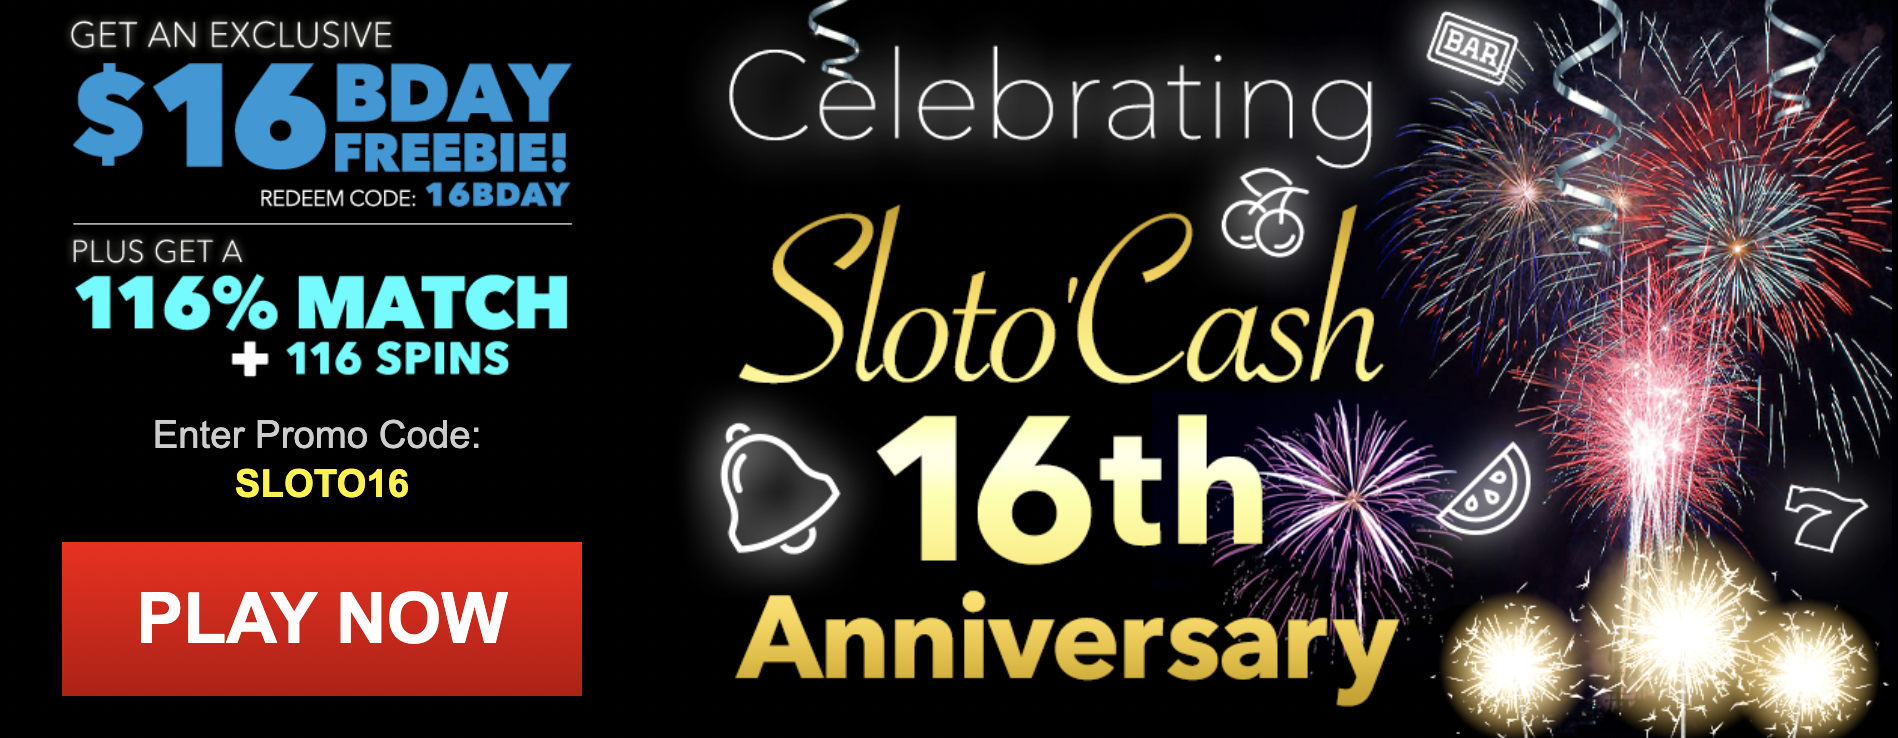 Get Ready for a Sweet 16 Slot Party at Sloto Cash Casino